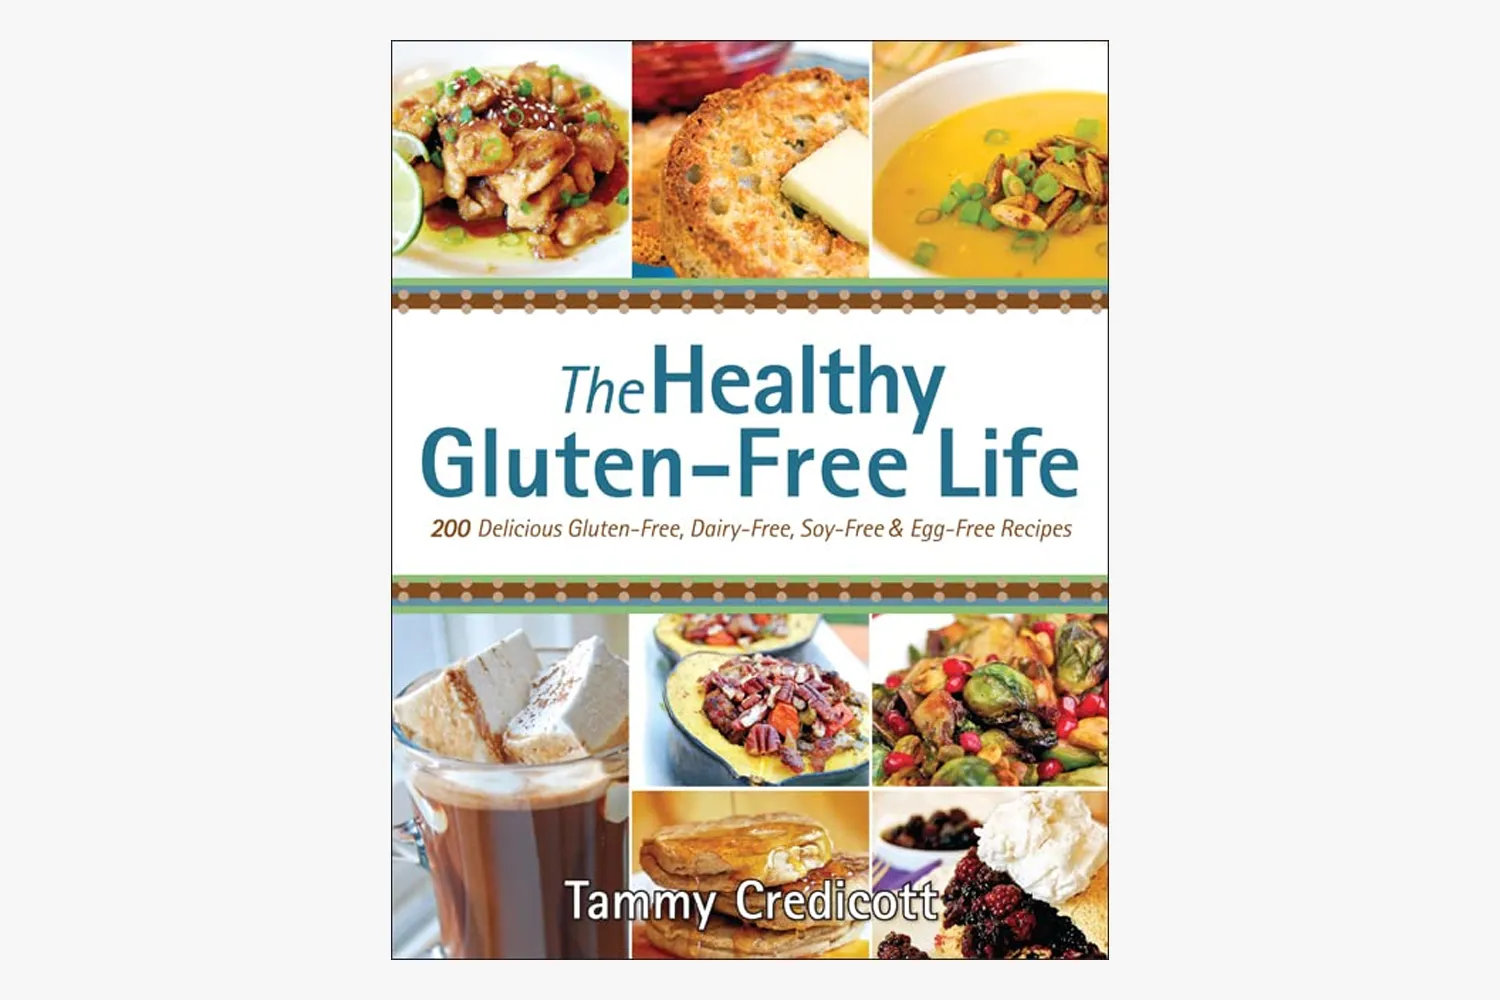 The Healthy Gluten-Free Life Book Cover